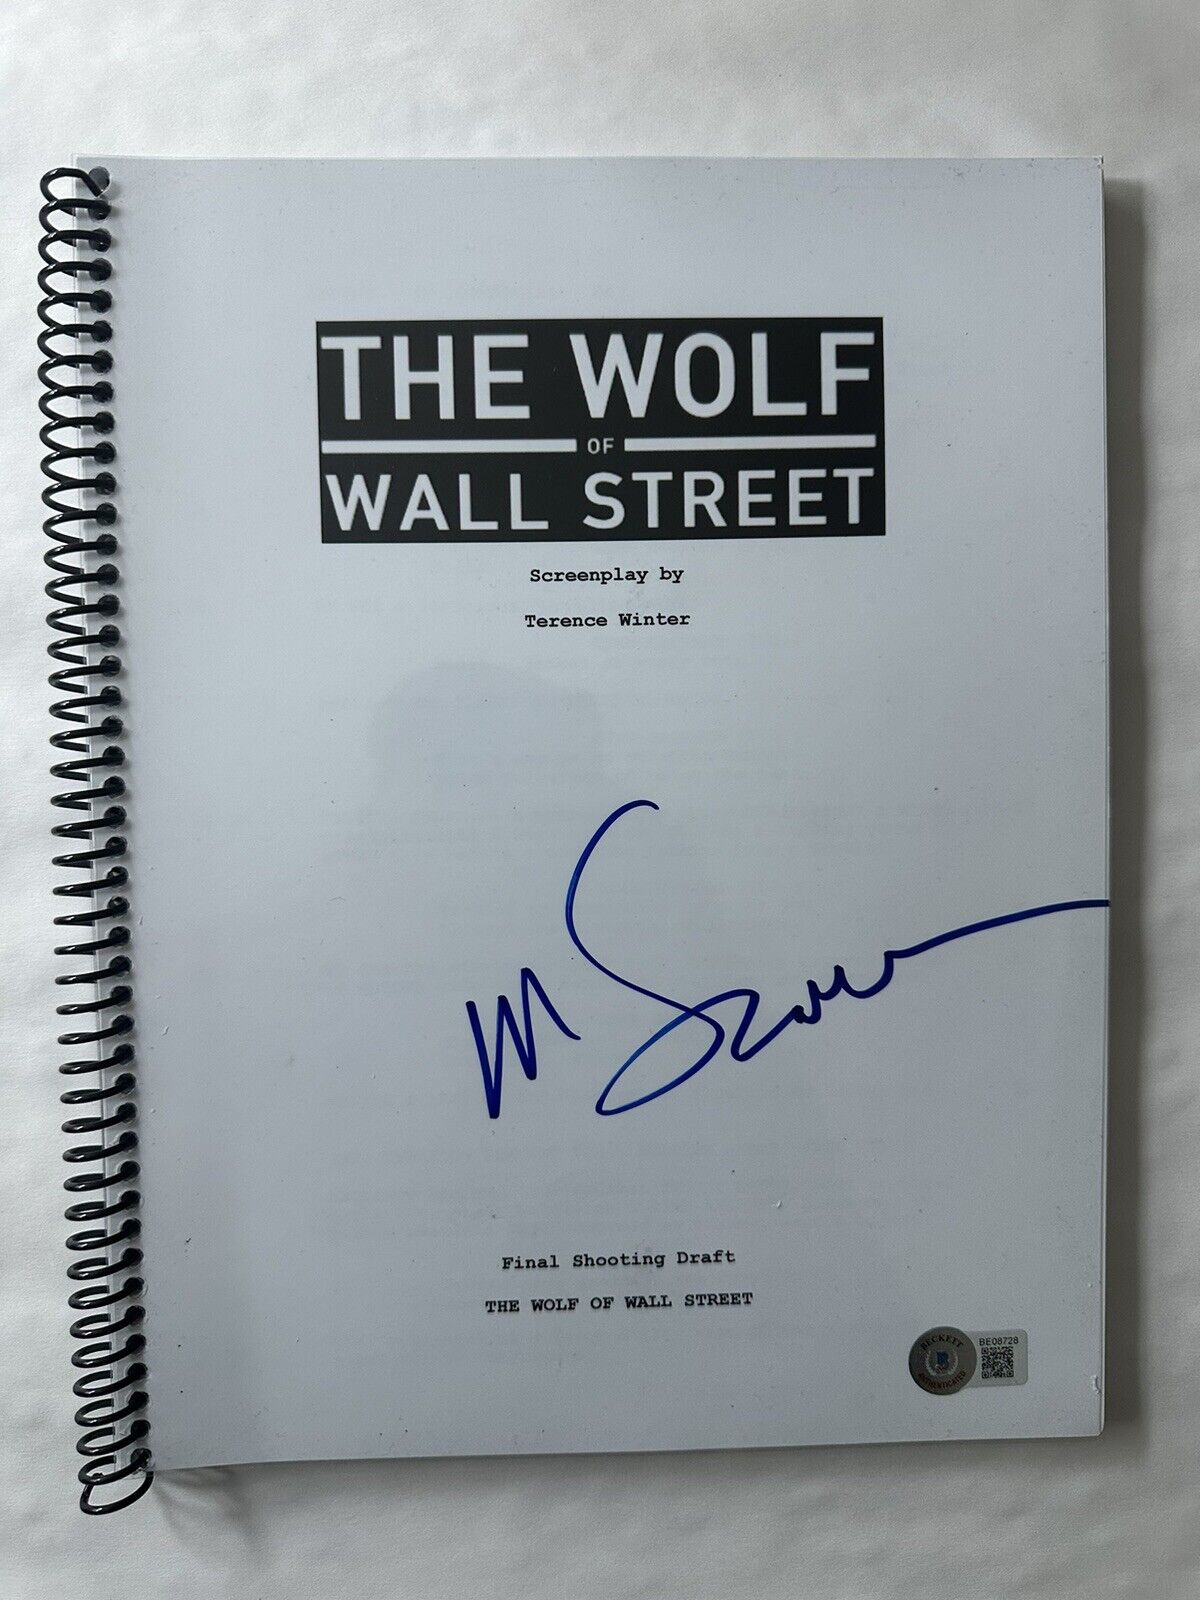 MARTIN SCORSESE SIGNED MOVIE SCRIPT WOLF OF WALL STREET DICAPRIO BECKETT BAS E